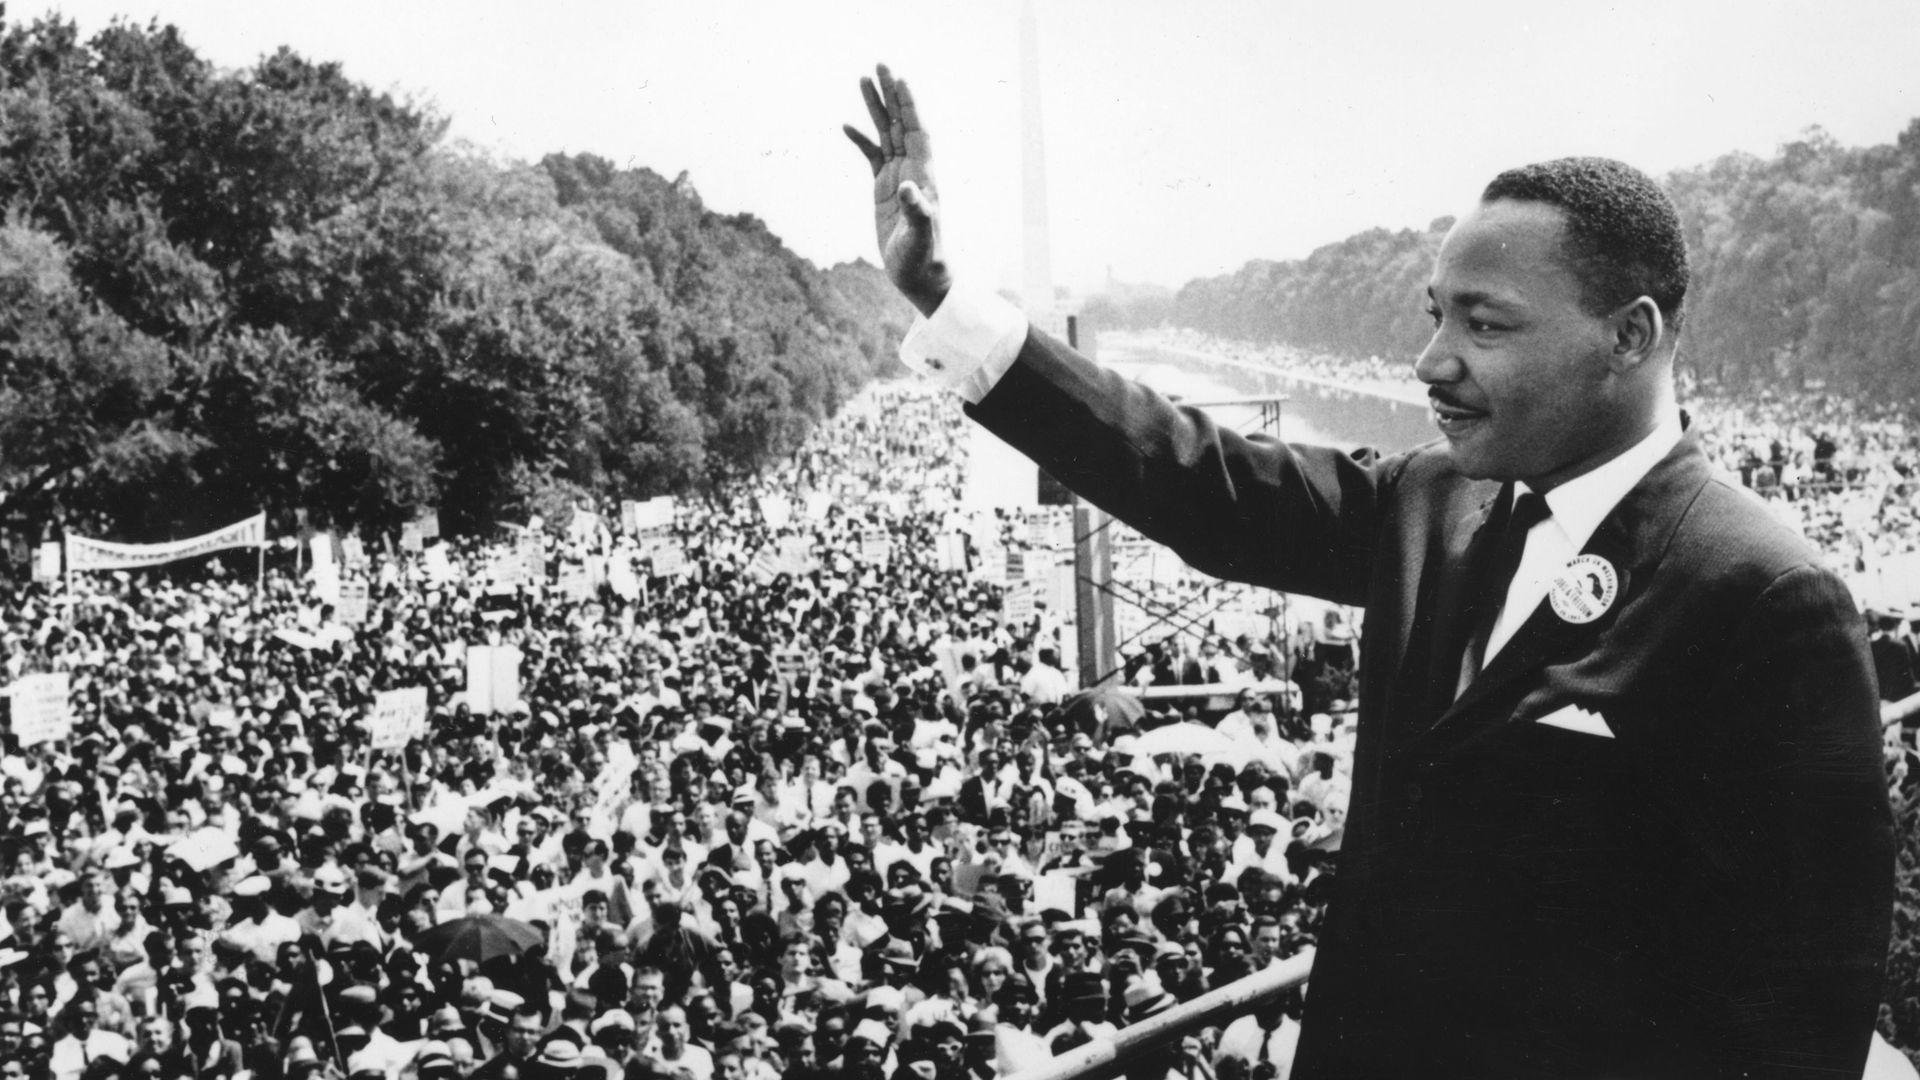 Martin Luther King Jr. waves to a crowd after giving his "I Have a Dream" speech in a historic black-and-white photo